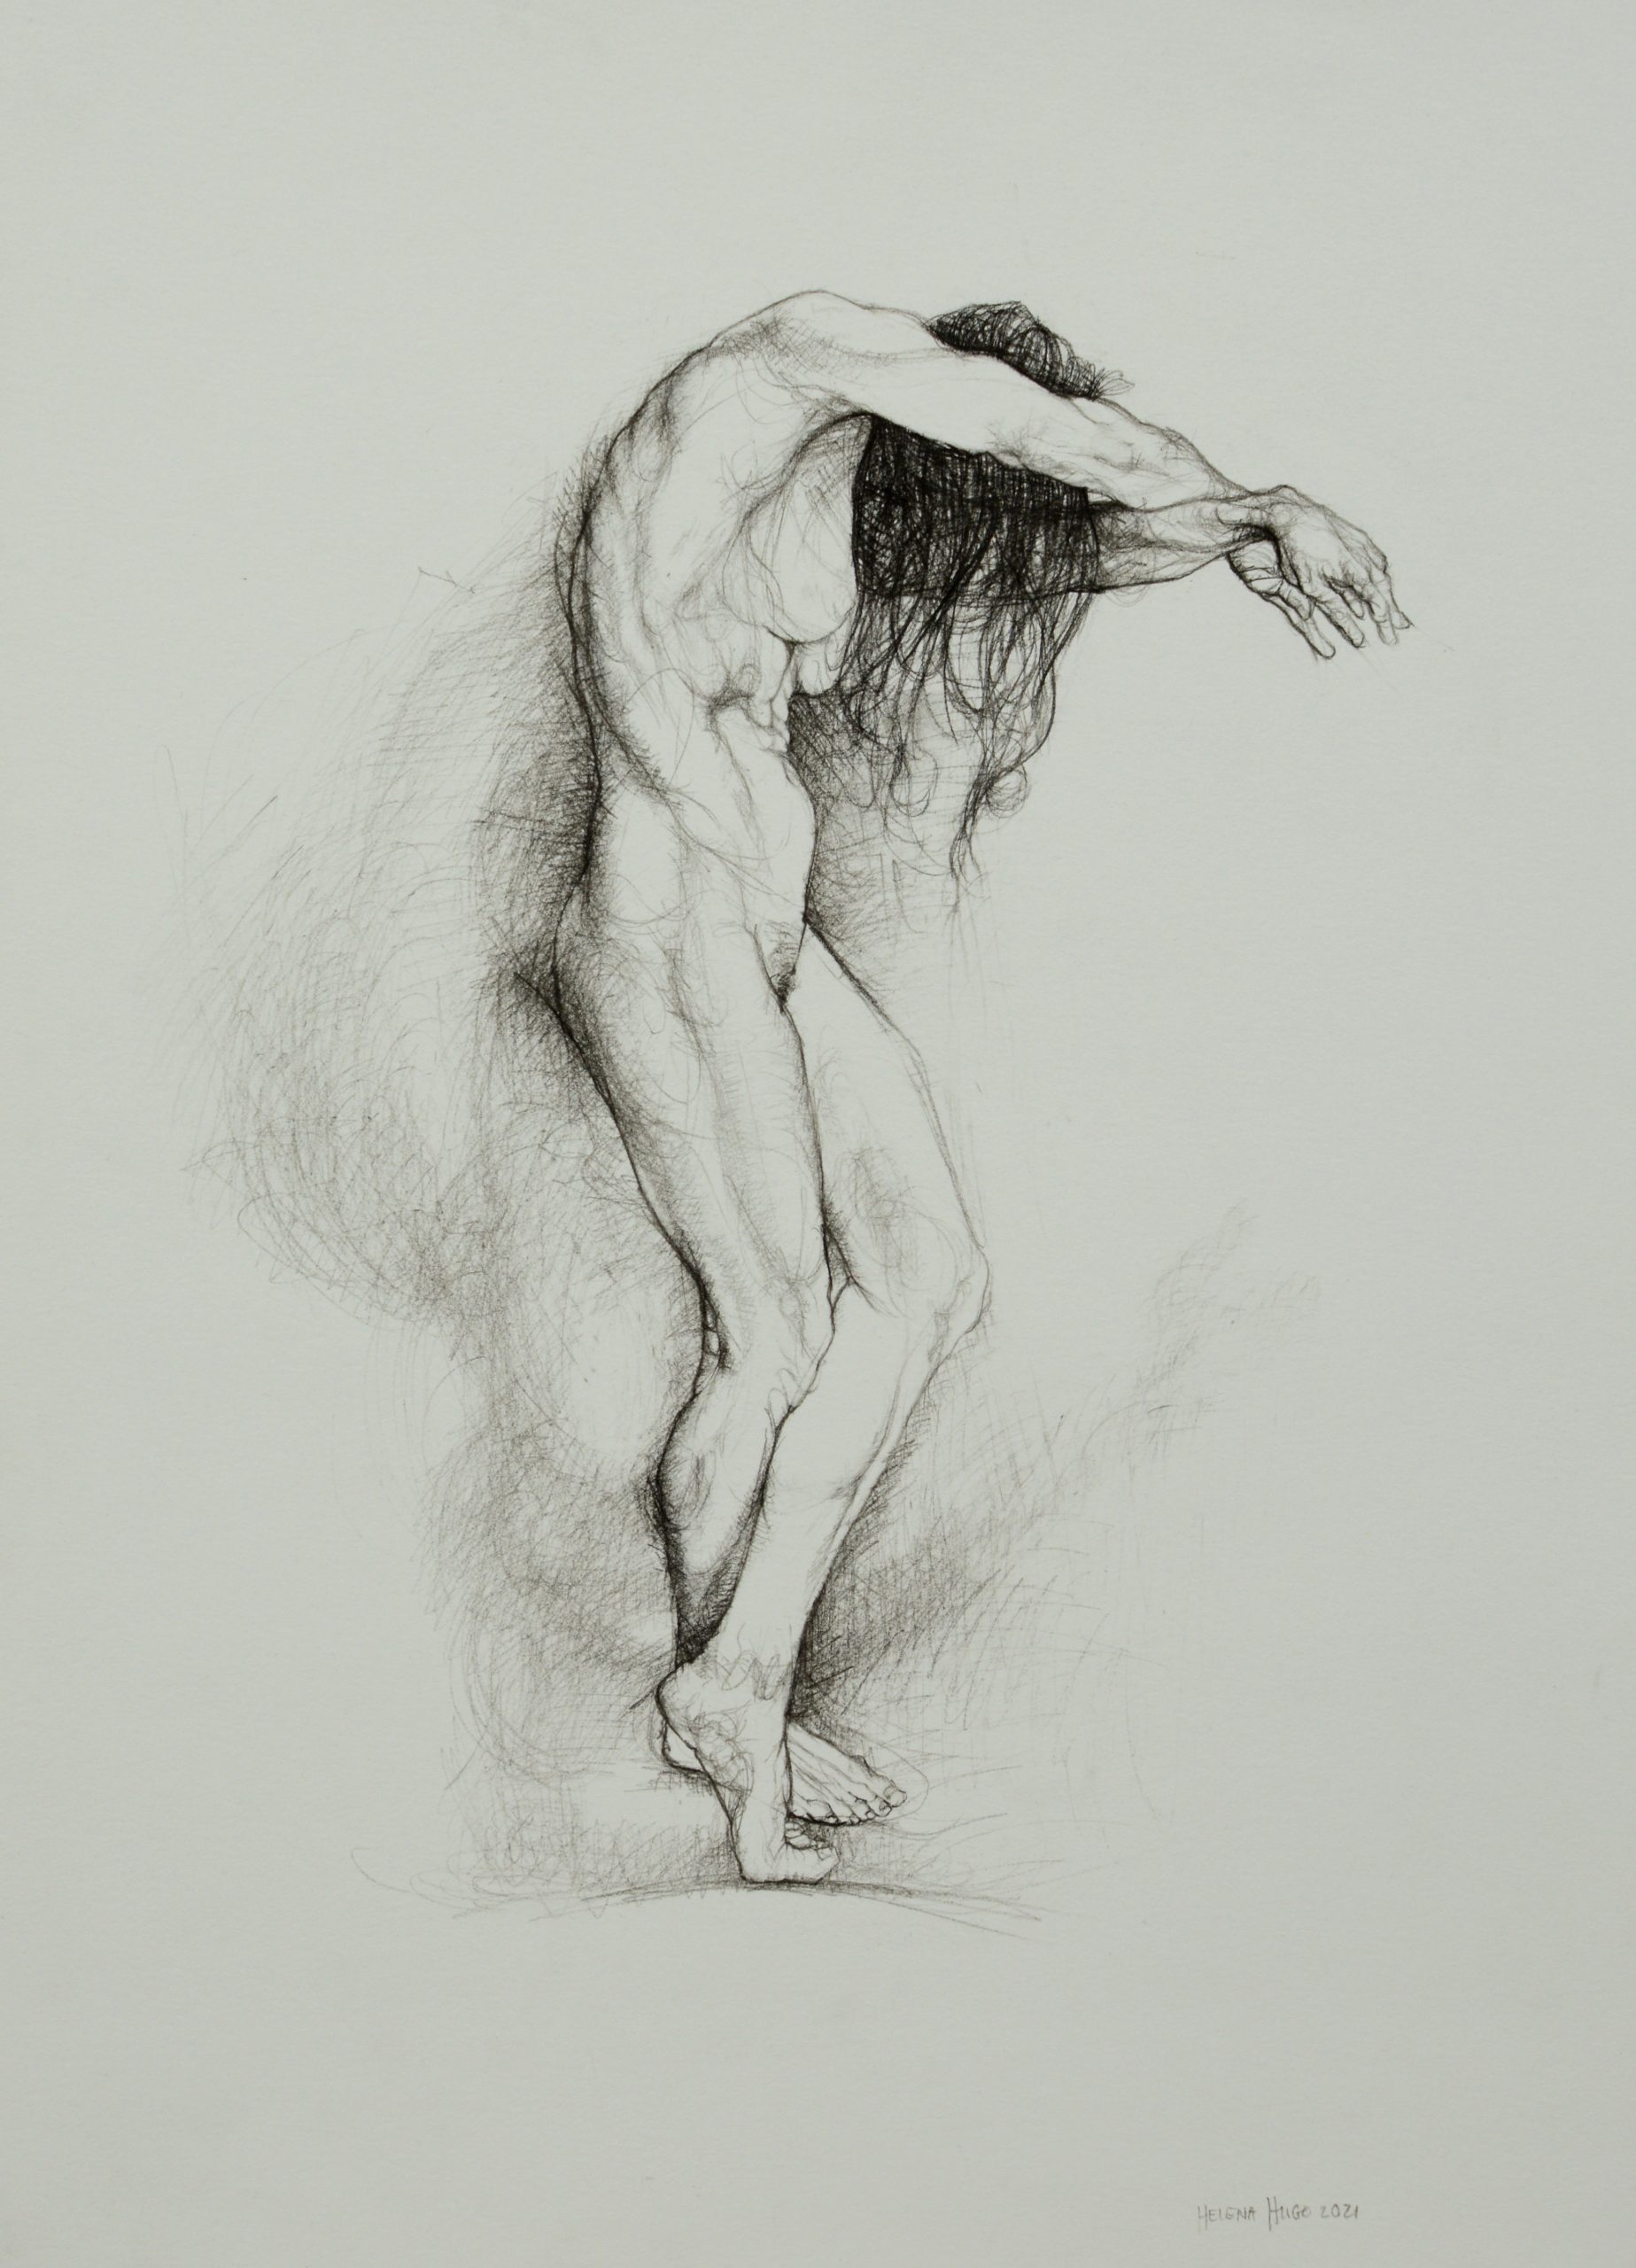 Pose as a Windswept Tree IV, 42cm x 30cm, woodless charcoal on paper